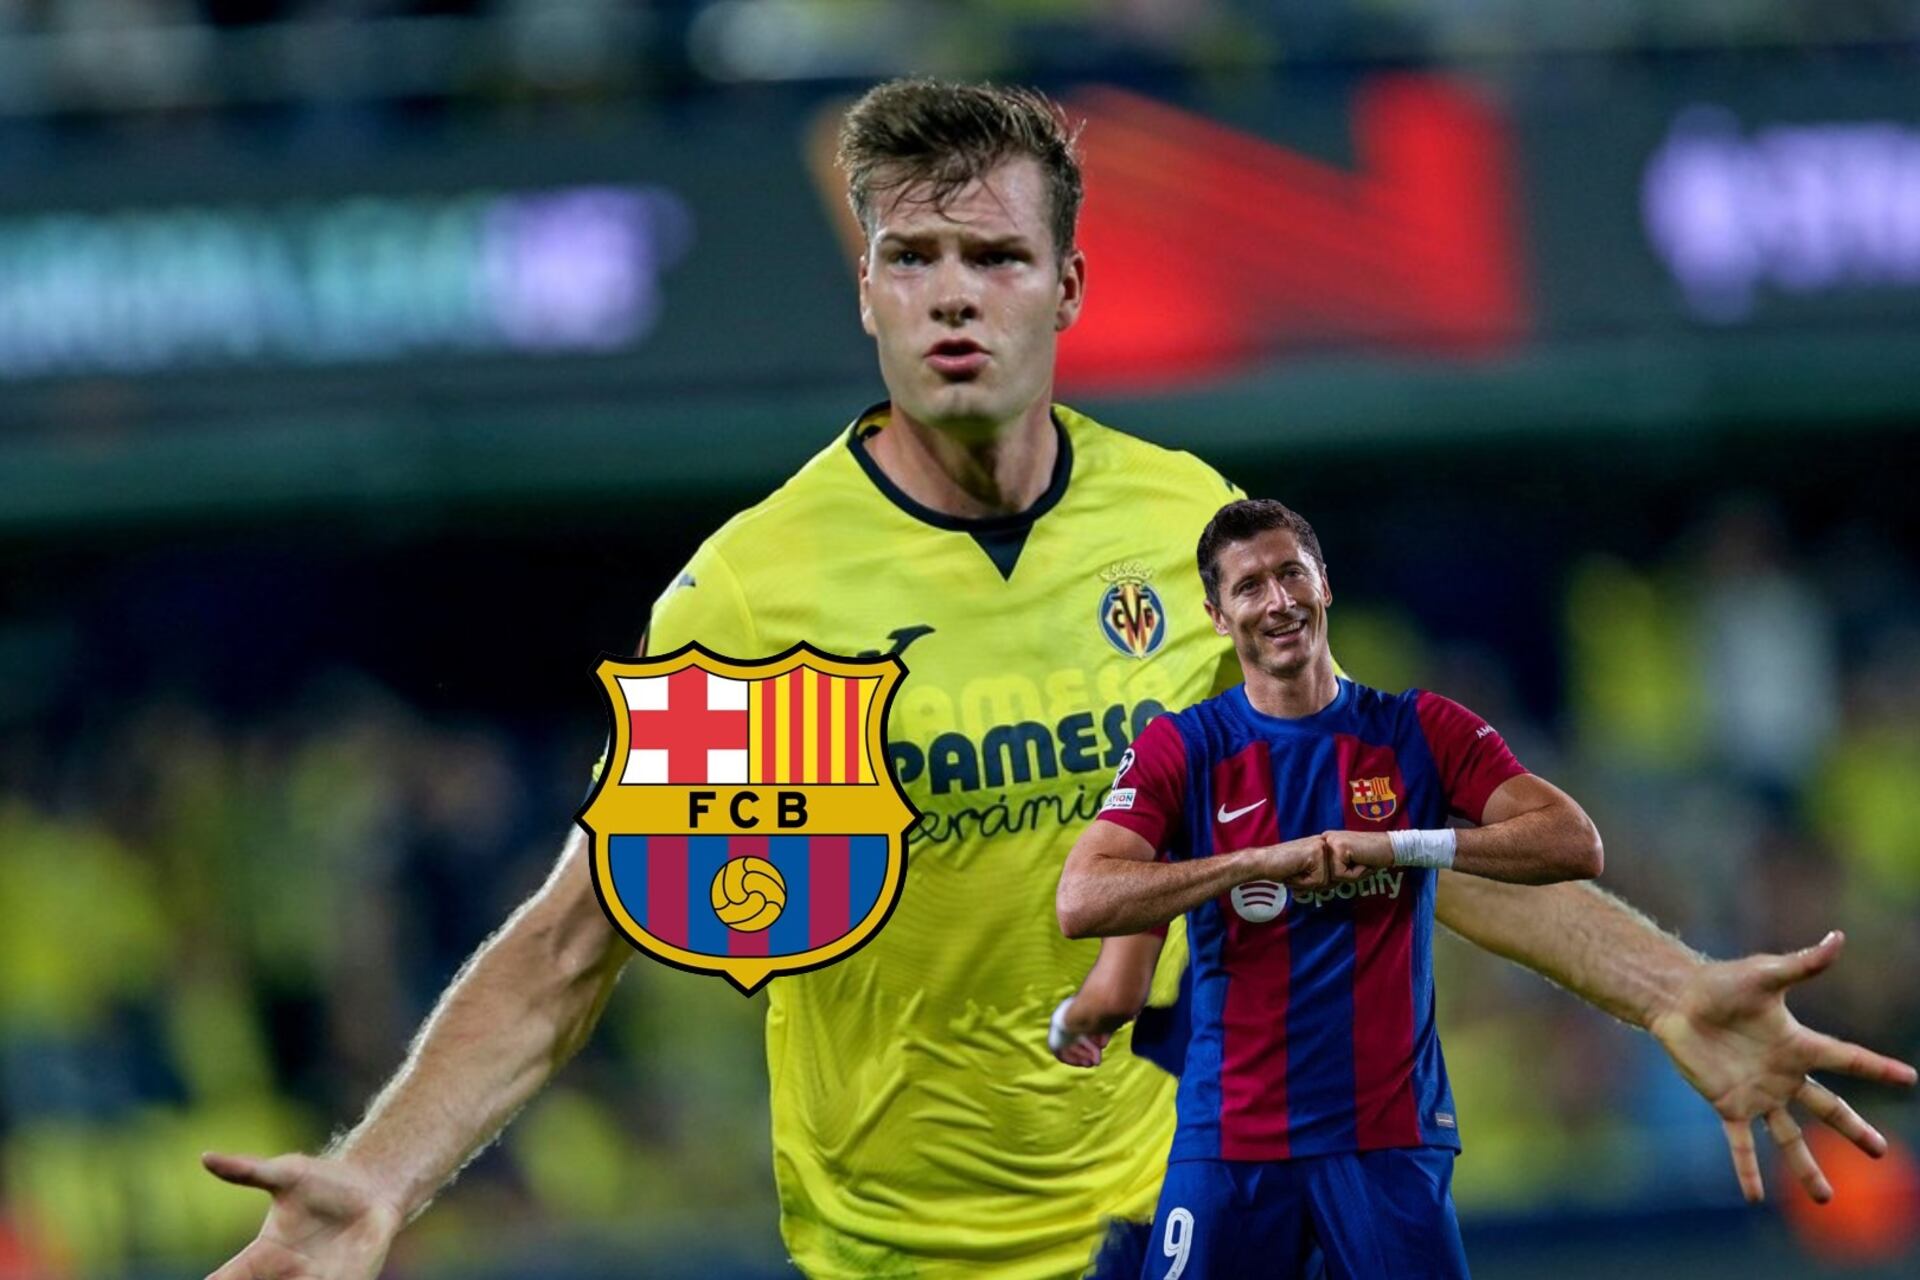 After his performance against Real Madrid, Barcelona wants Sorloth as Lewandoswki’s replacement, how much would it cost